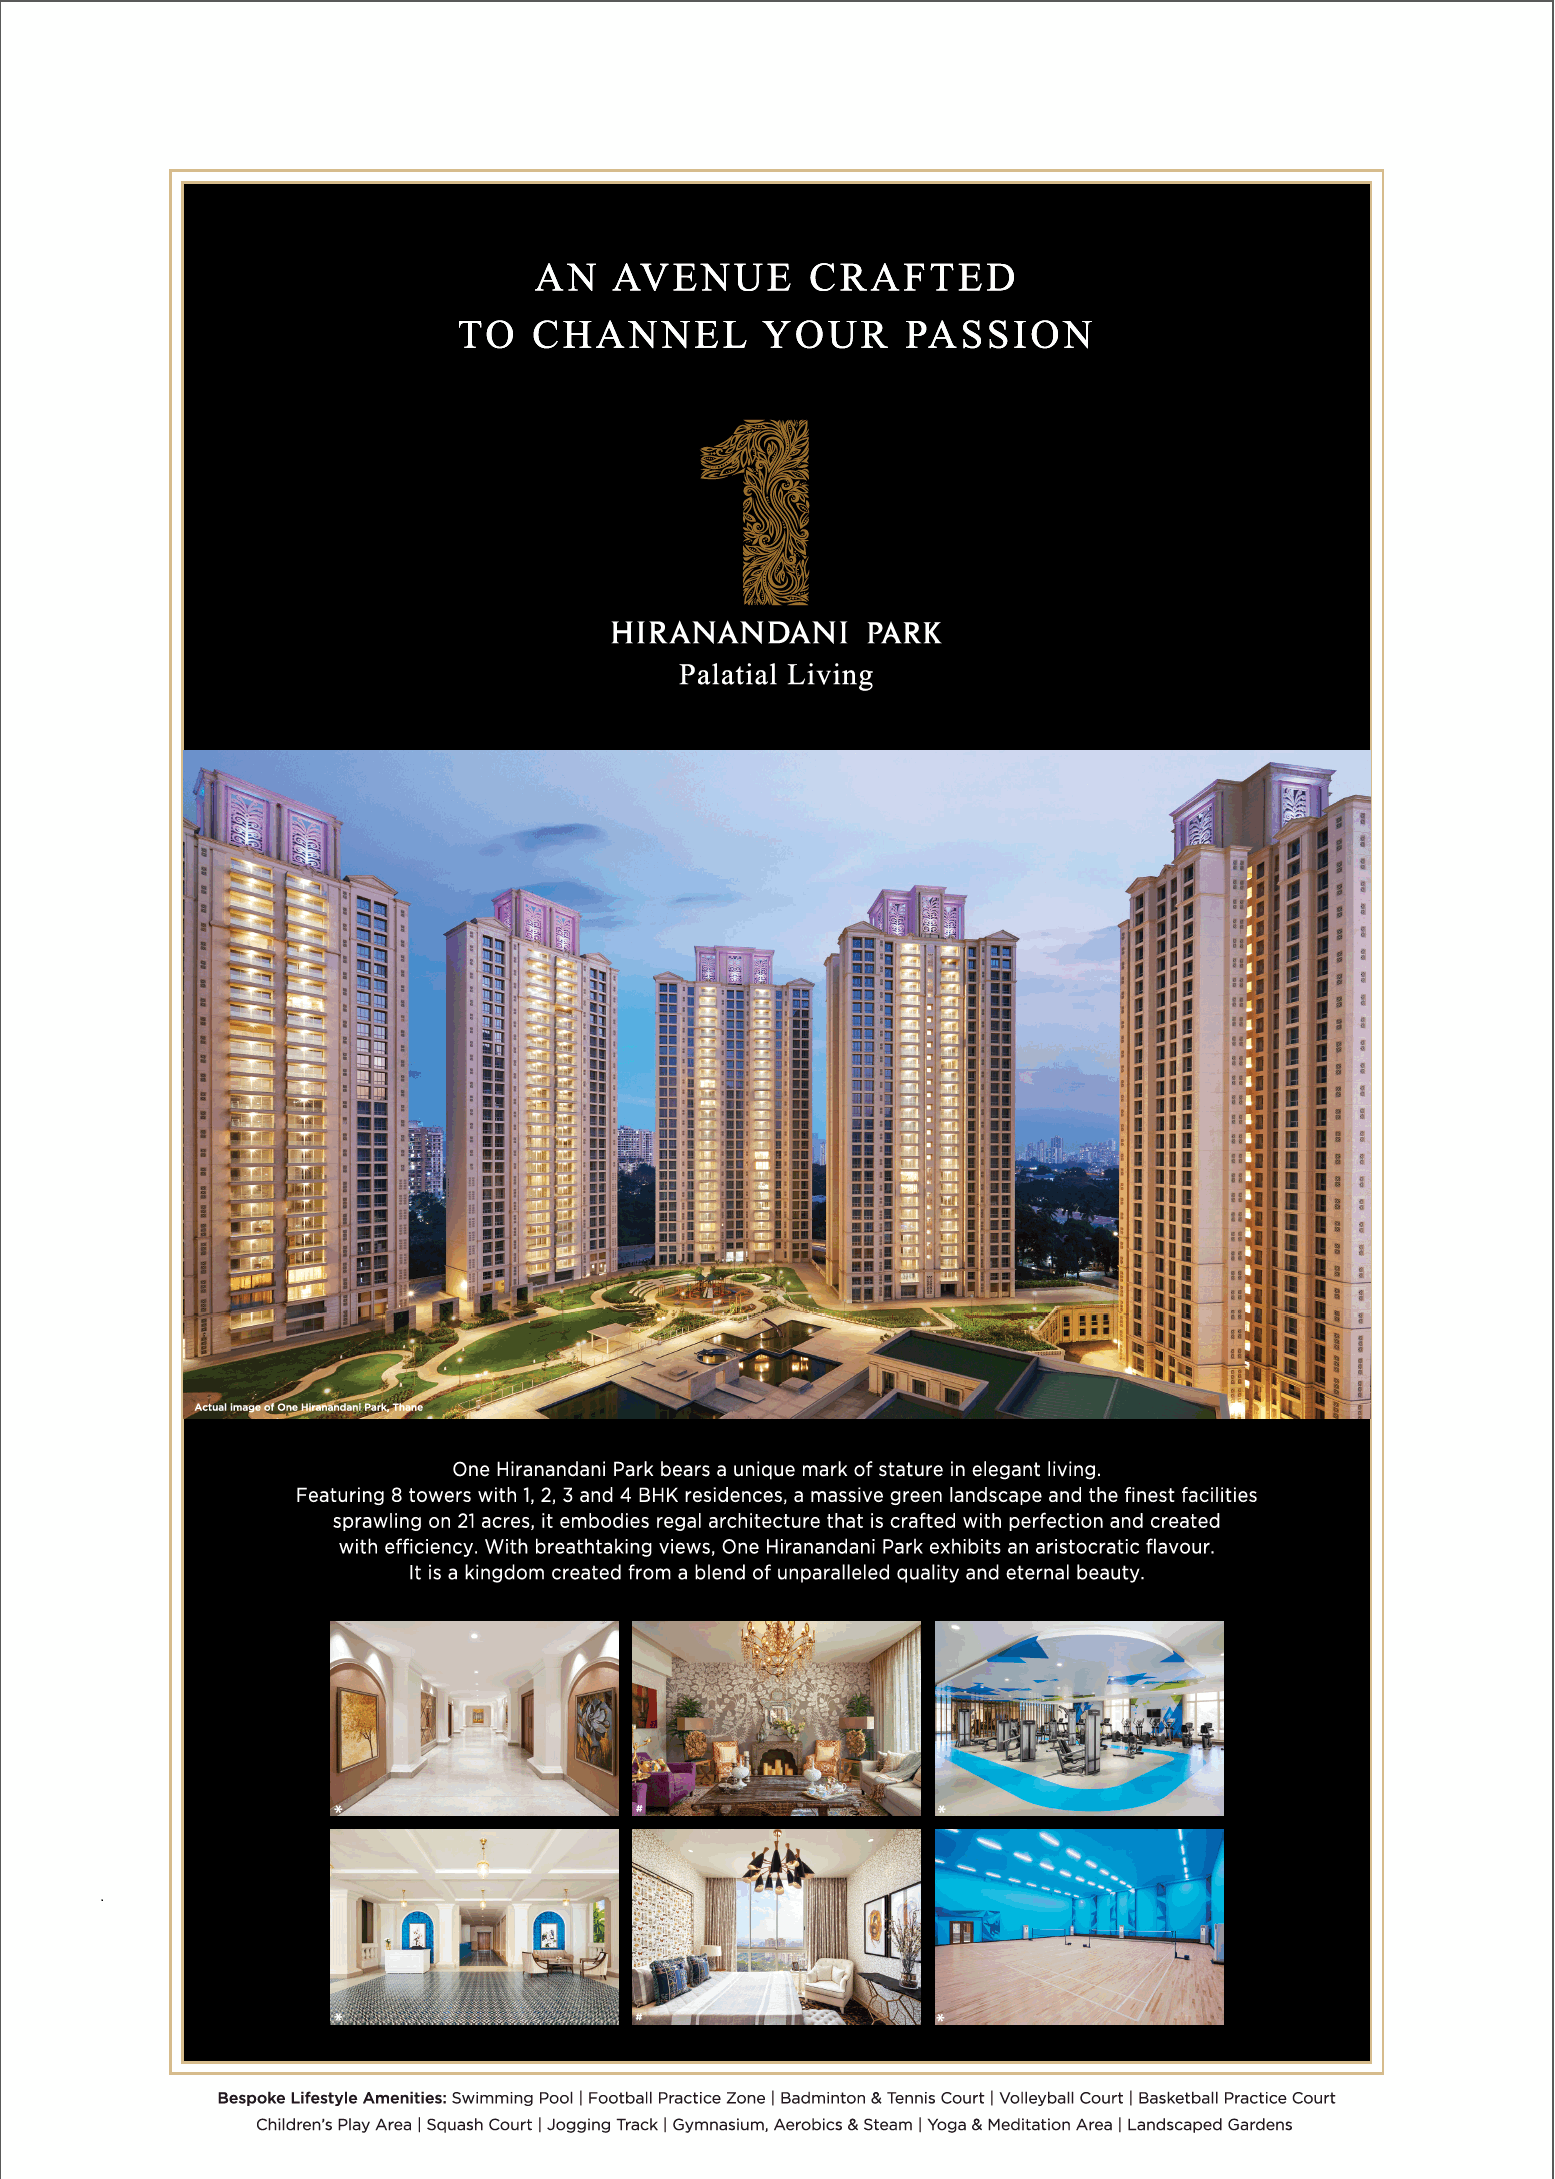 An avenue crafted to channel your passion is One Hiranandani Park, Mumbai